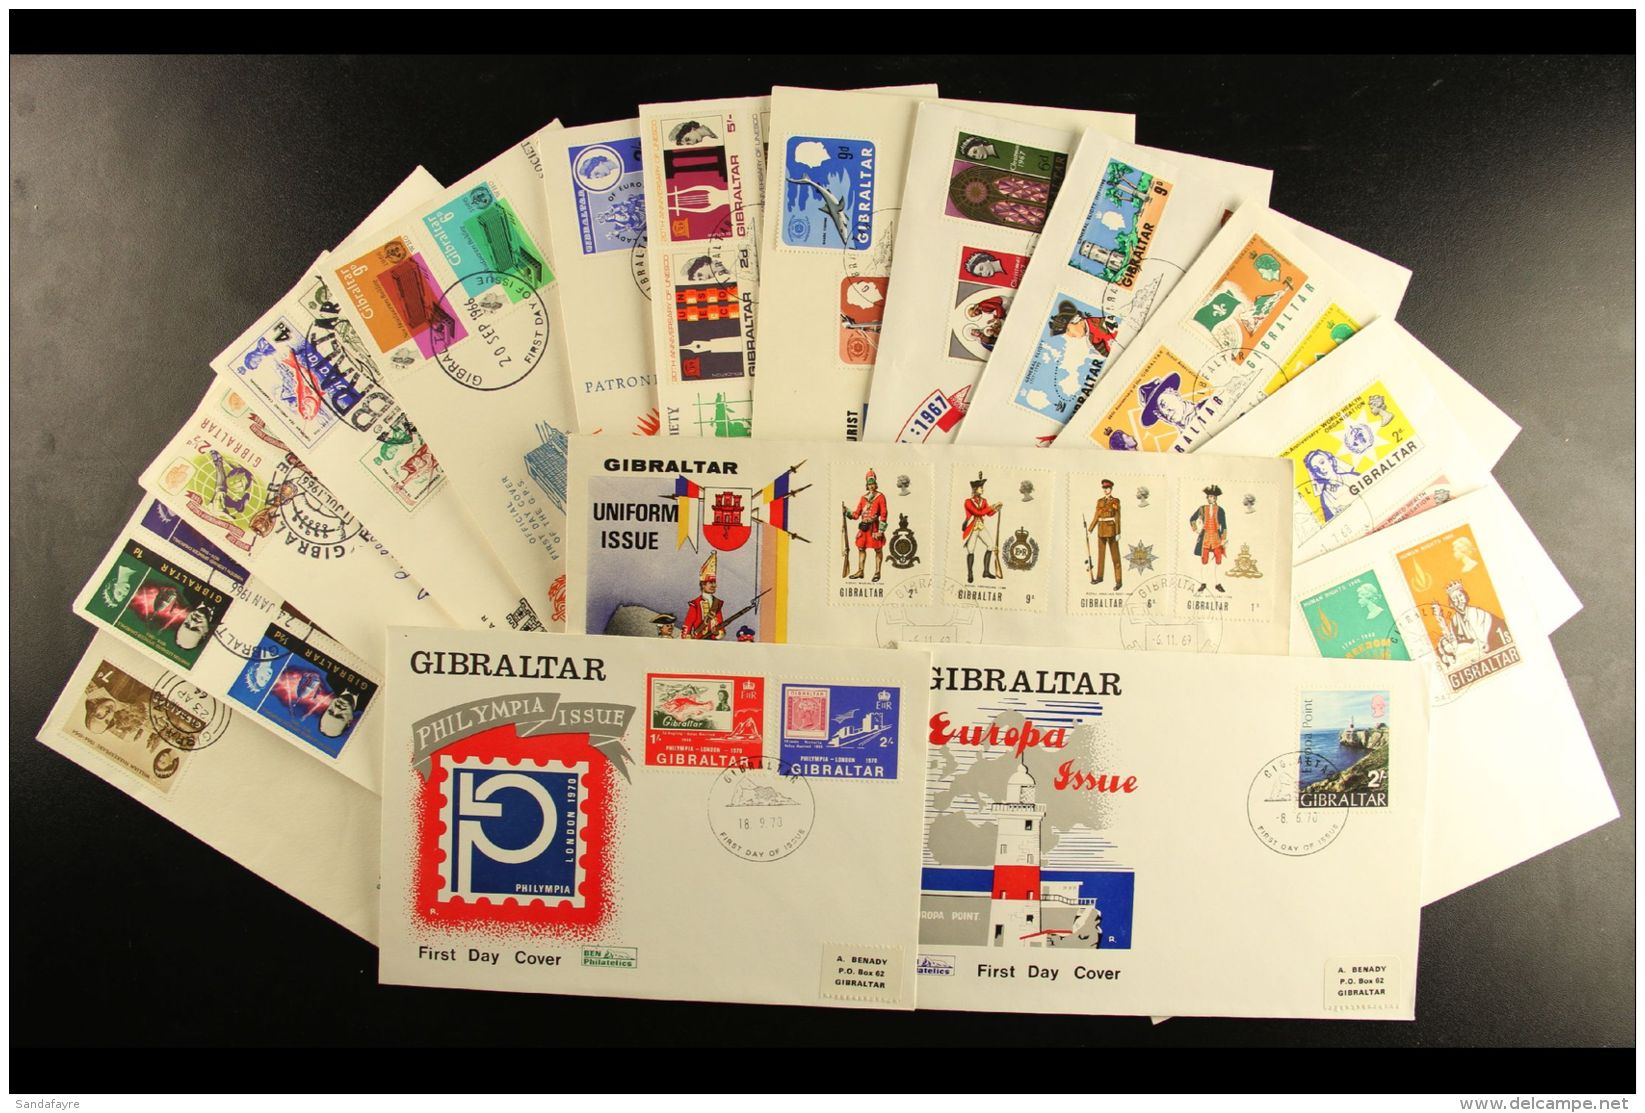 1964-99 FIRST DAY COVER COLLECTION Presented Chronologically In A Small Box. A Highly Complete Run Of The Period... - Gibraltar